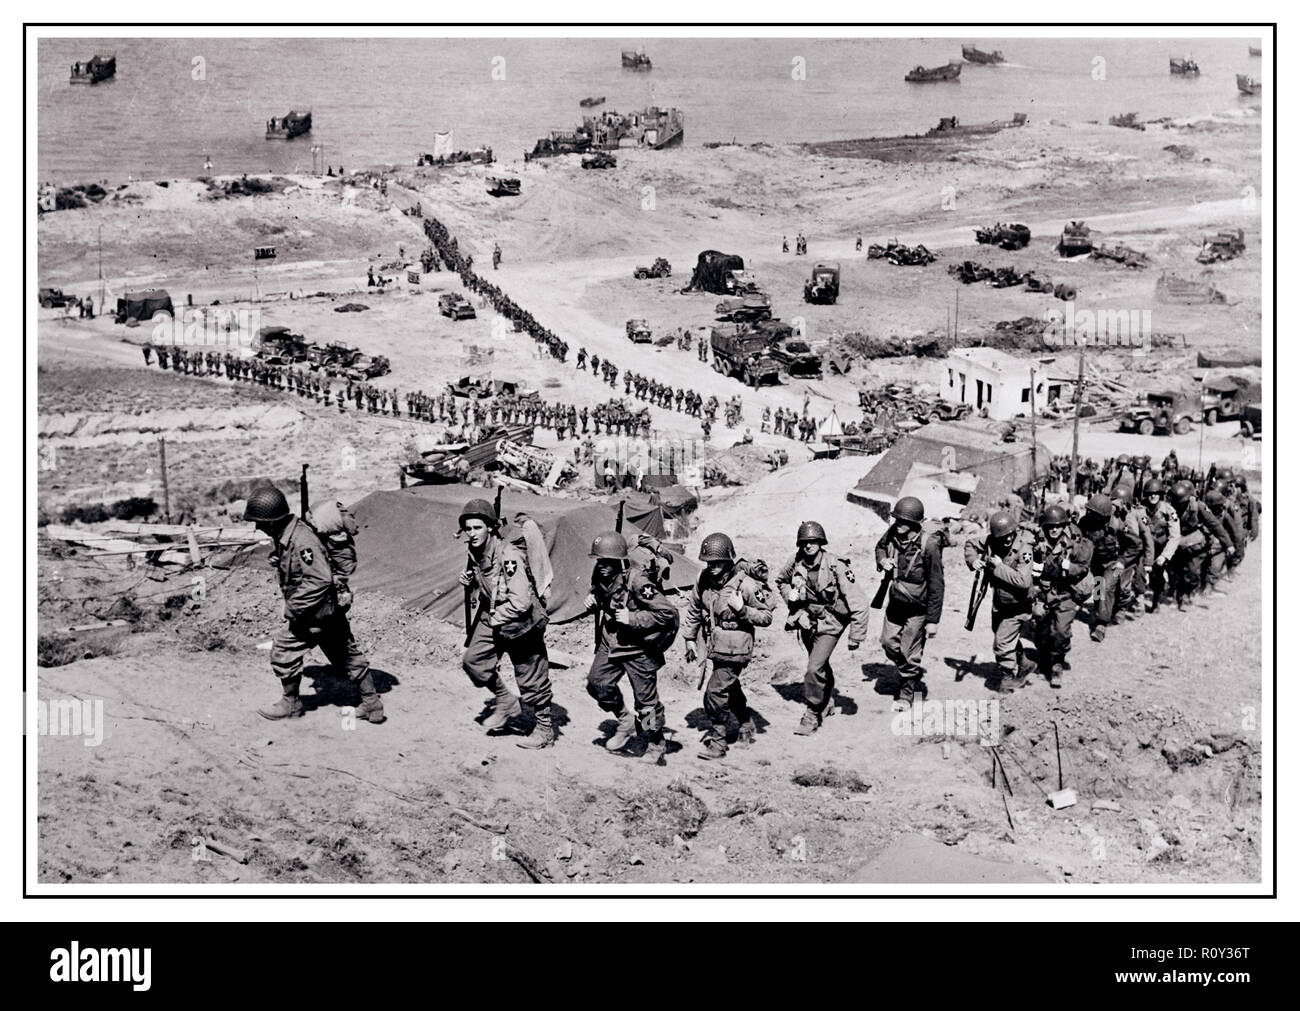 OPERATION OVERLORD D-Day +1 WW2 B&W image of the build-up at Omaha Beach Normandy. U.S. 2nd Infantry Division troops and equipment moving inland toward Saint-Laurent-sur-Mer on D-Day +1, 7 June 1944. Stock Photo